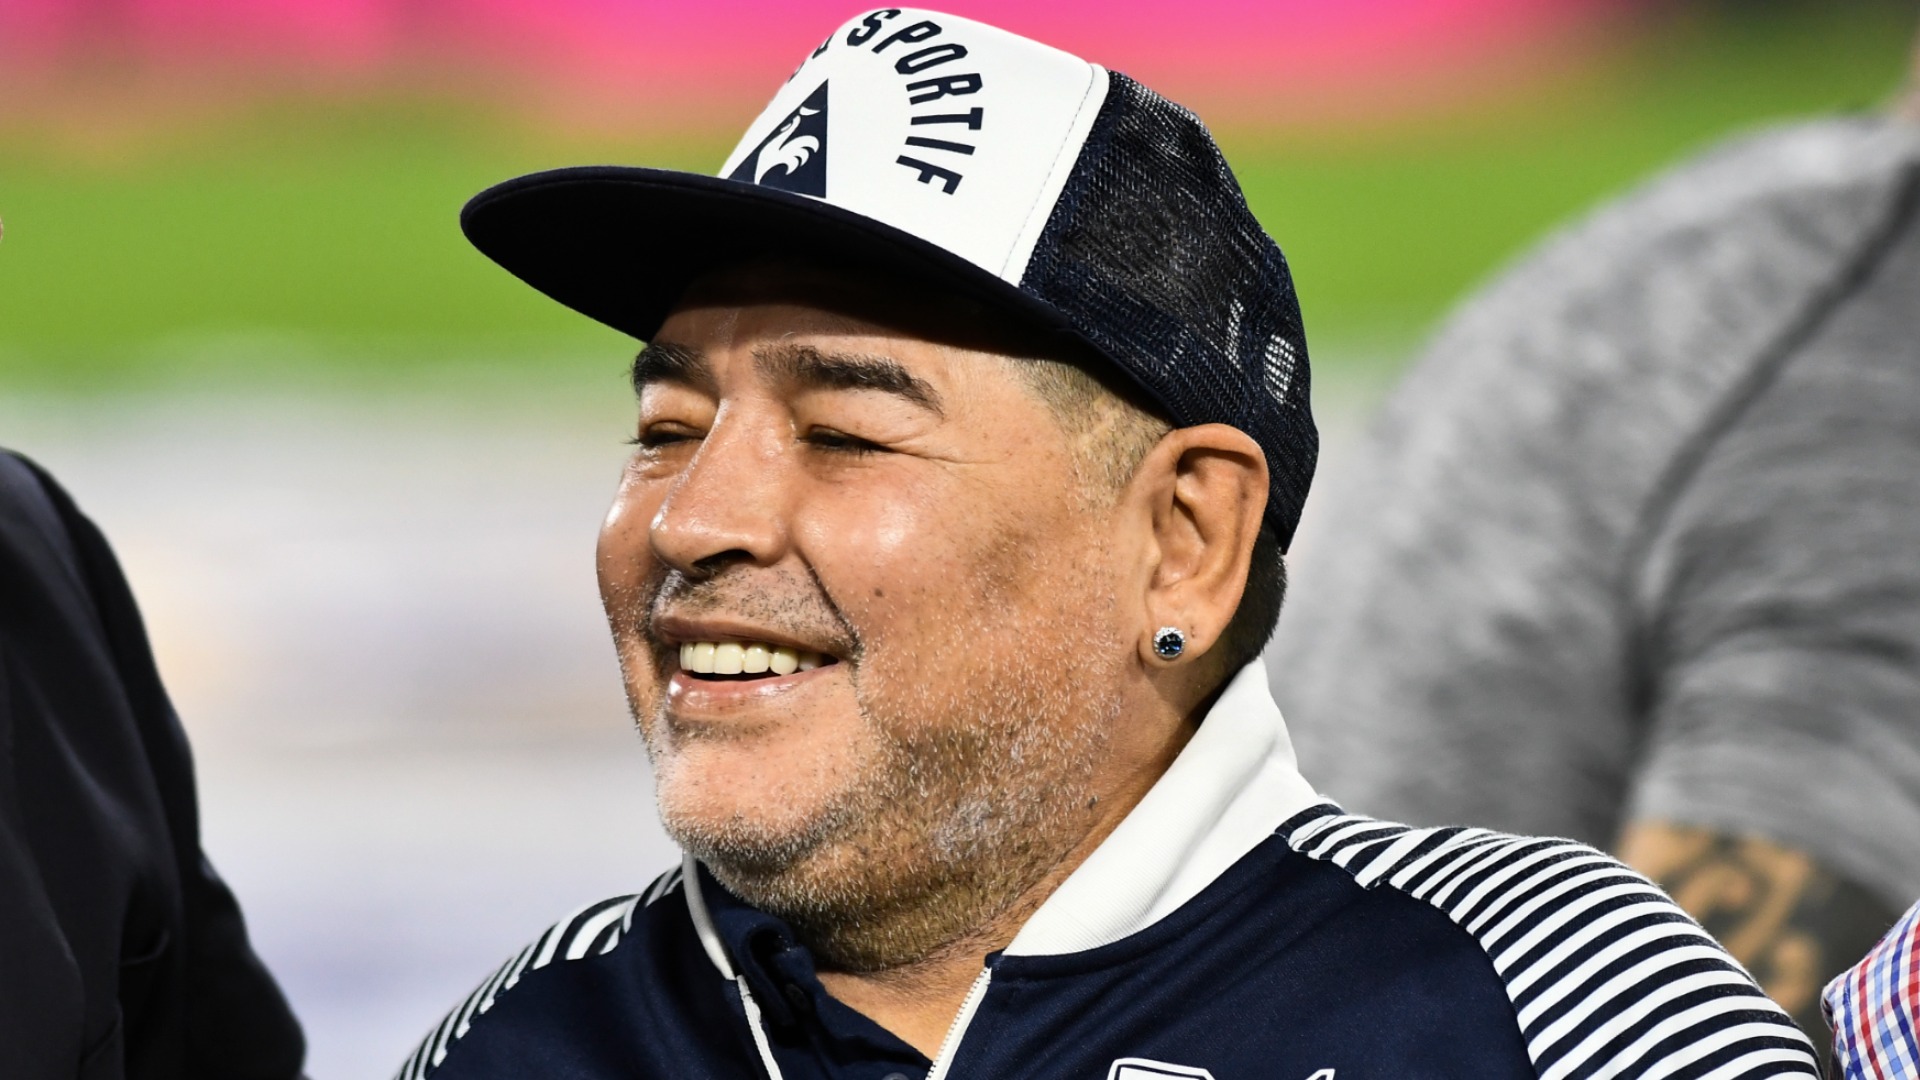 Former Napoli and Argentina great Diego Maradona has committed to Gimnasia y Esgrima La Plata for another season.